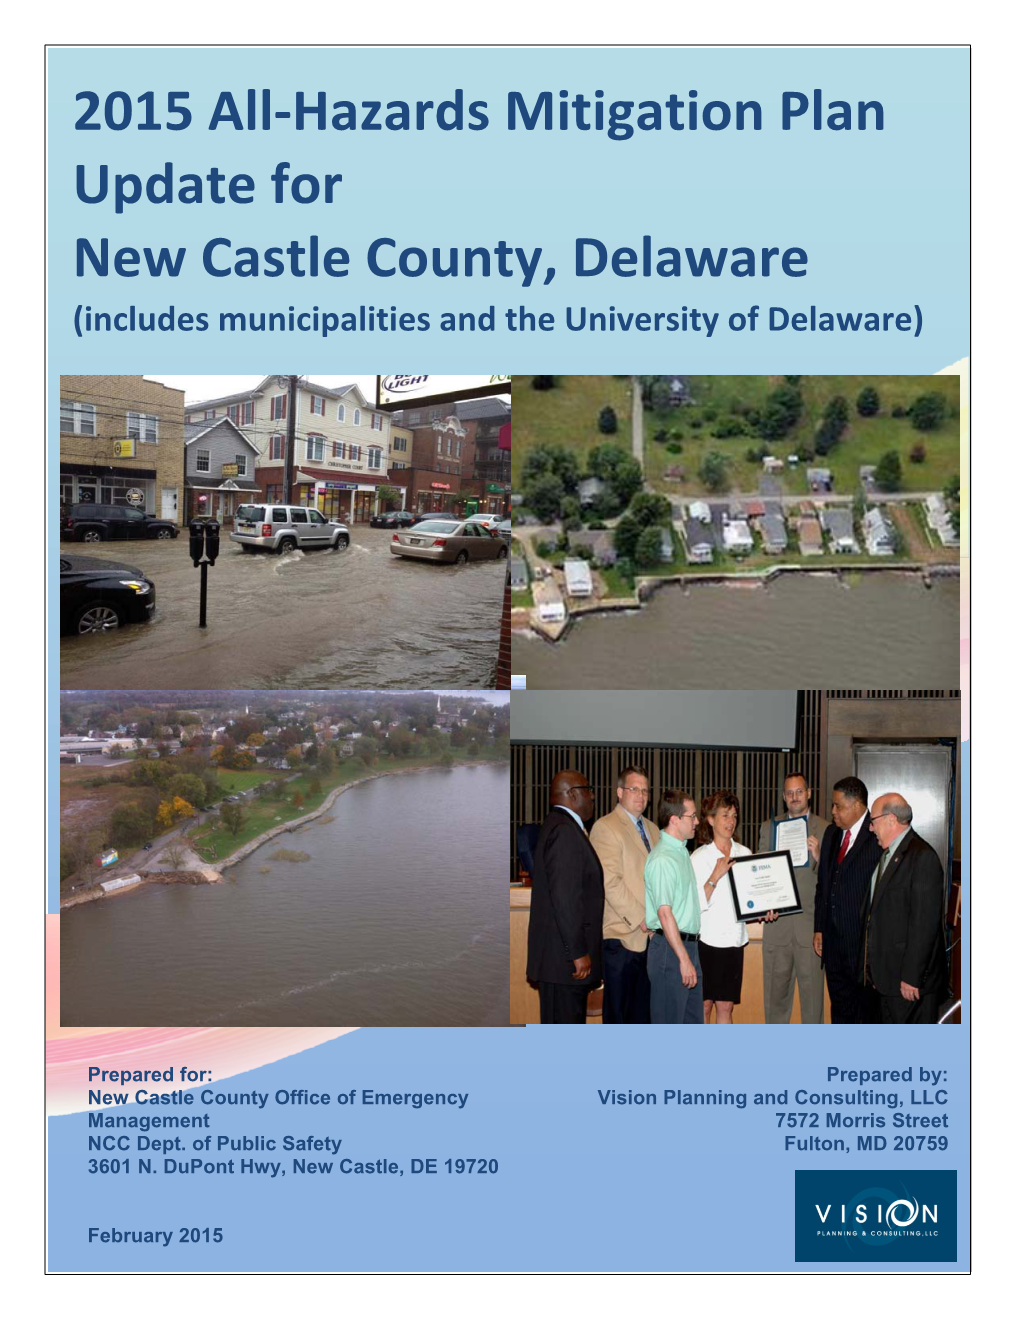 2015 All-Hazards Mitigation Plan Update for New Castle County